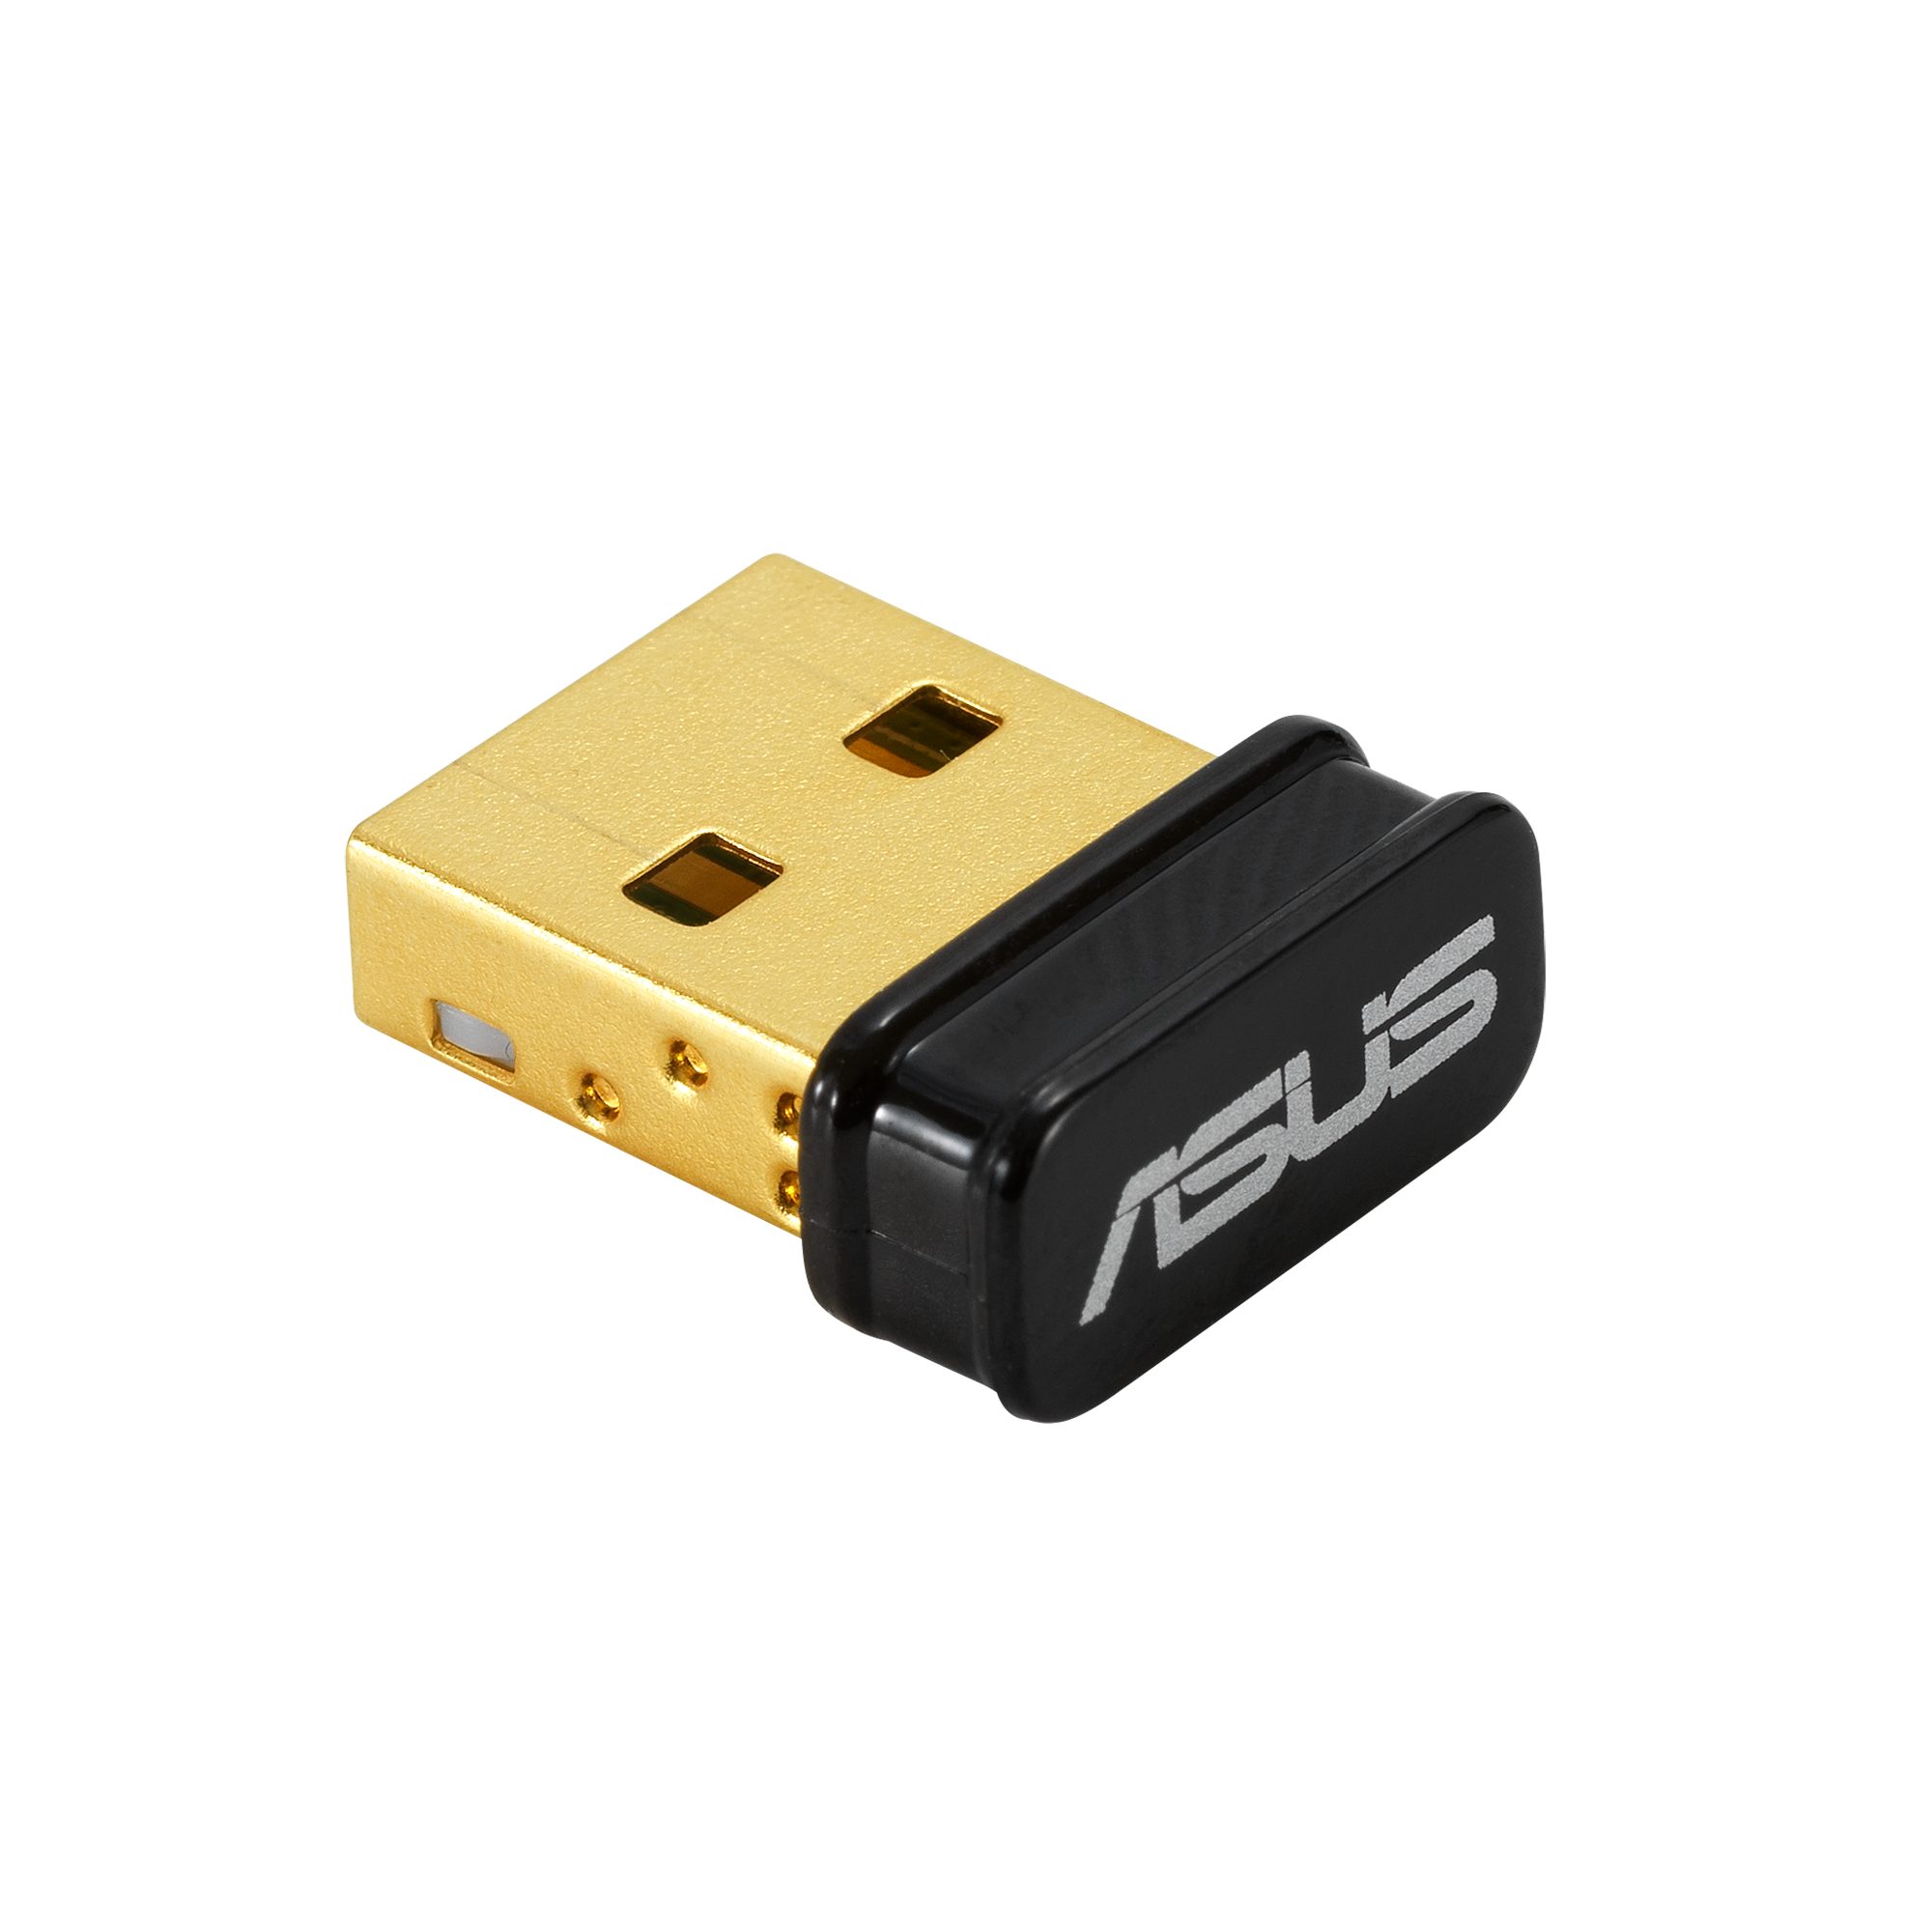 New in tech: Asus chromebox and Logitech bluetooth adapter - The